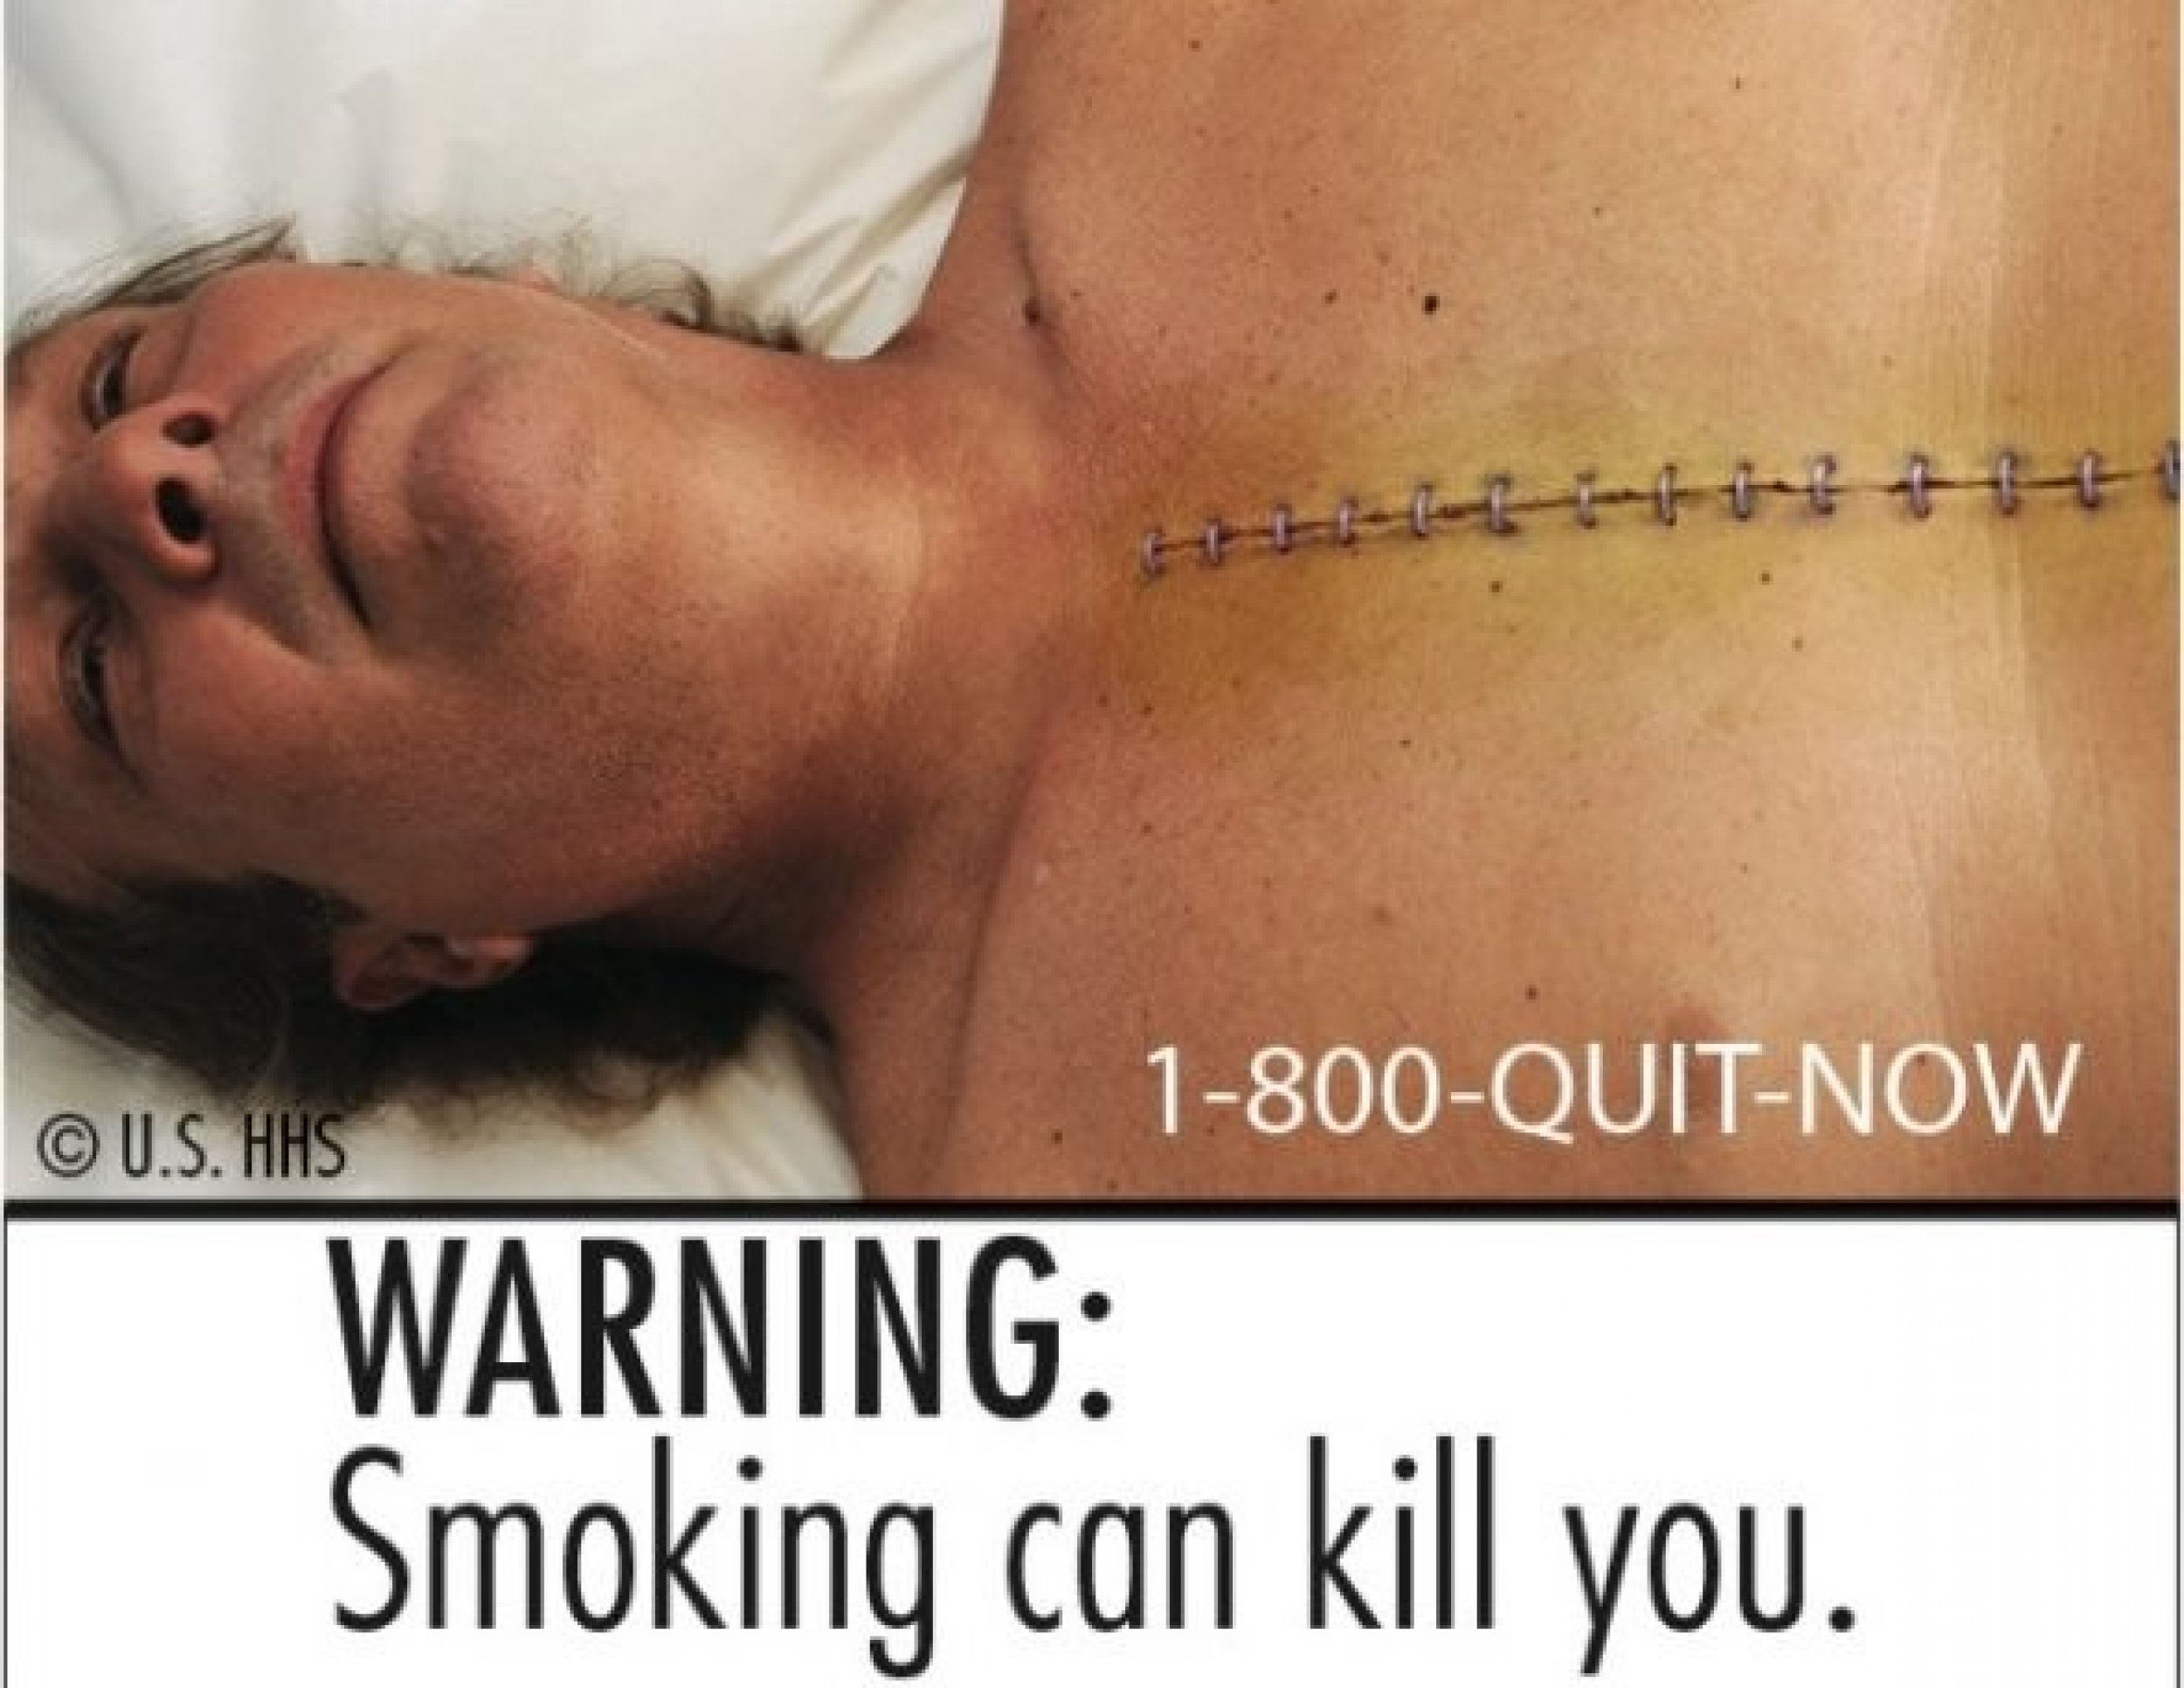 FDA releases new labels you are about to see on cigarette packs